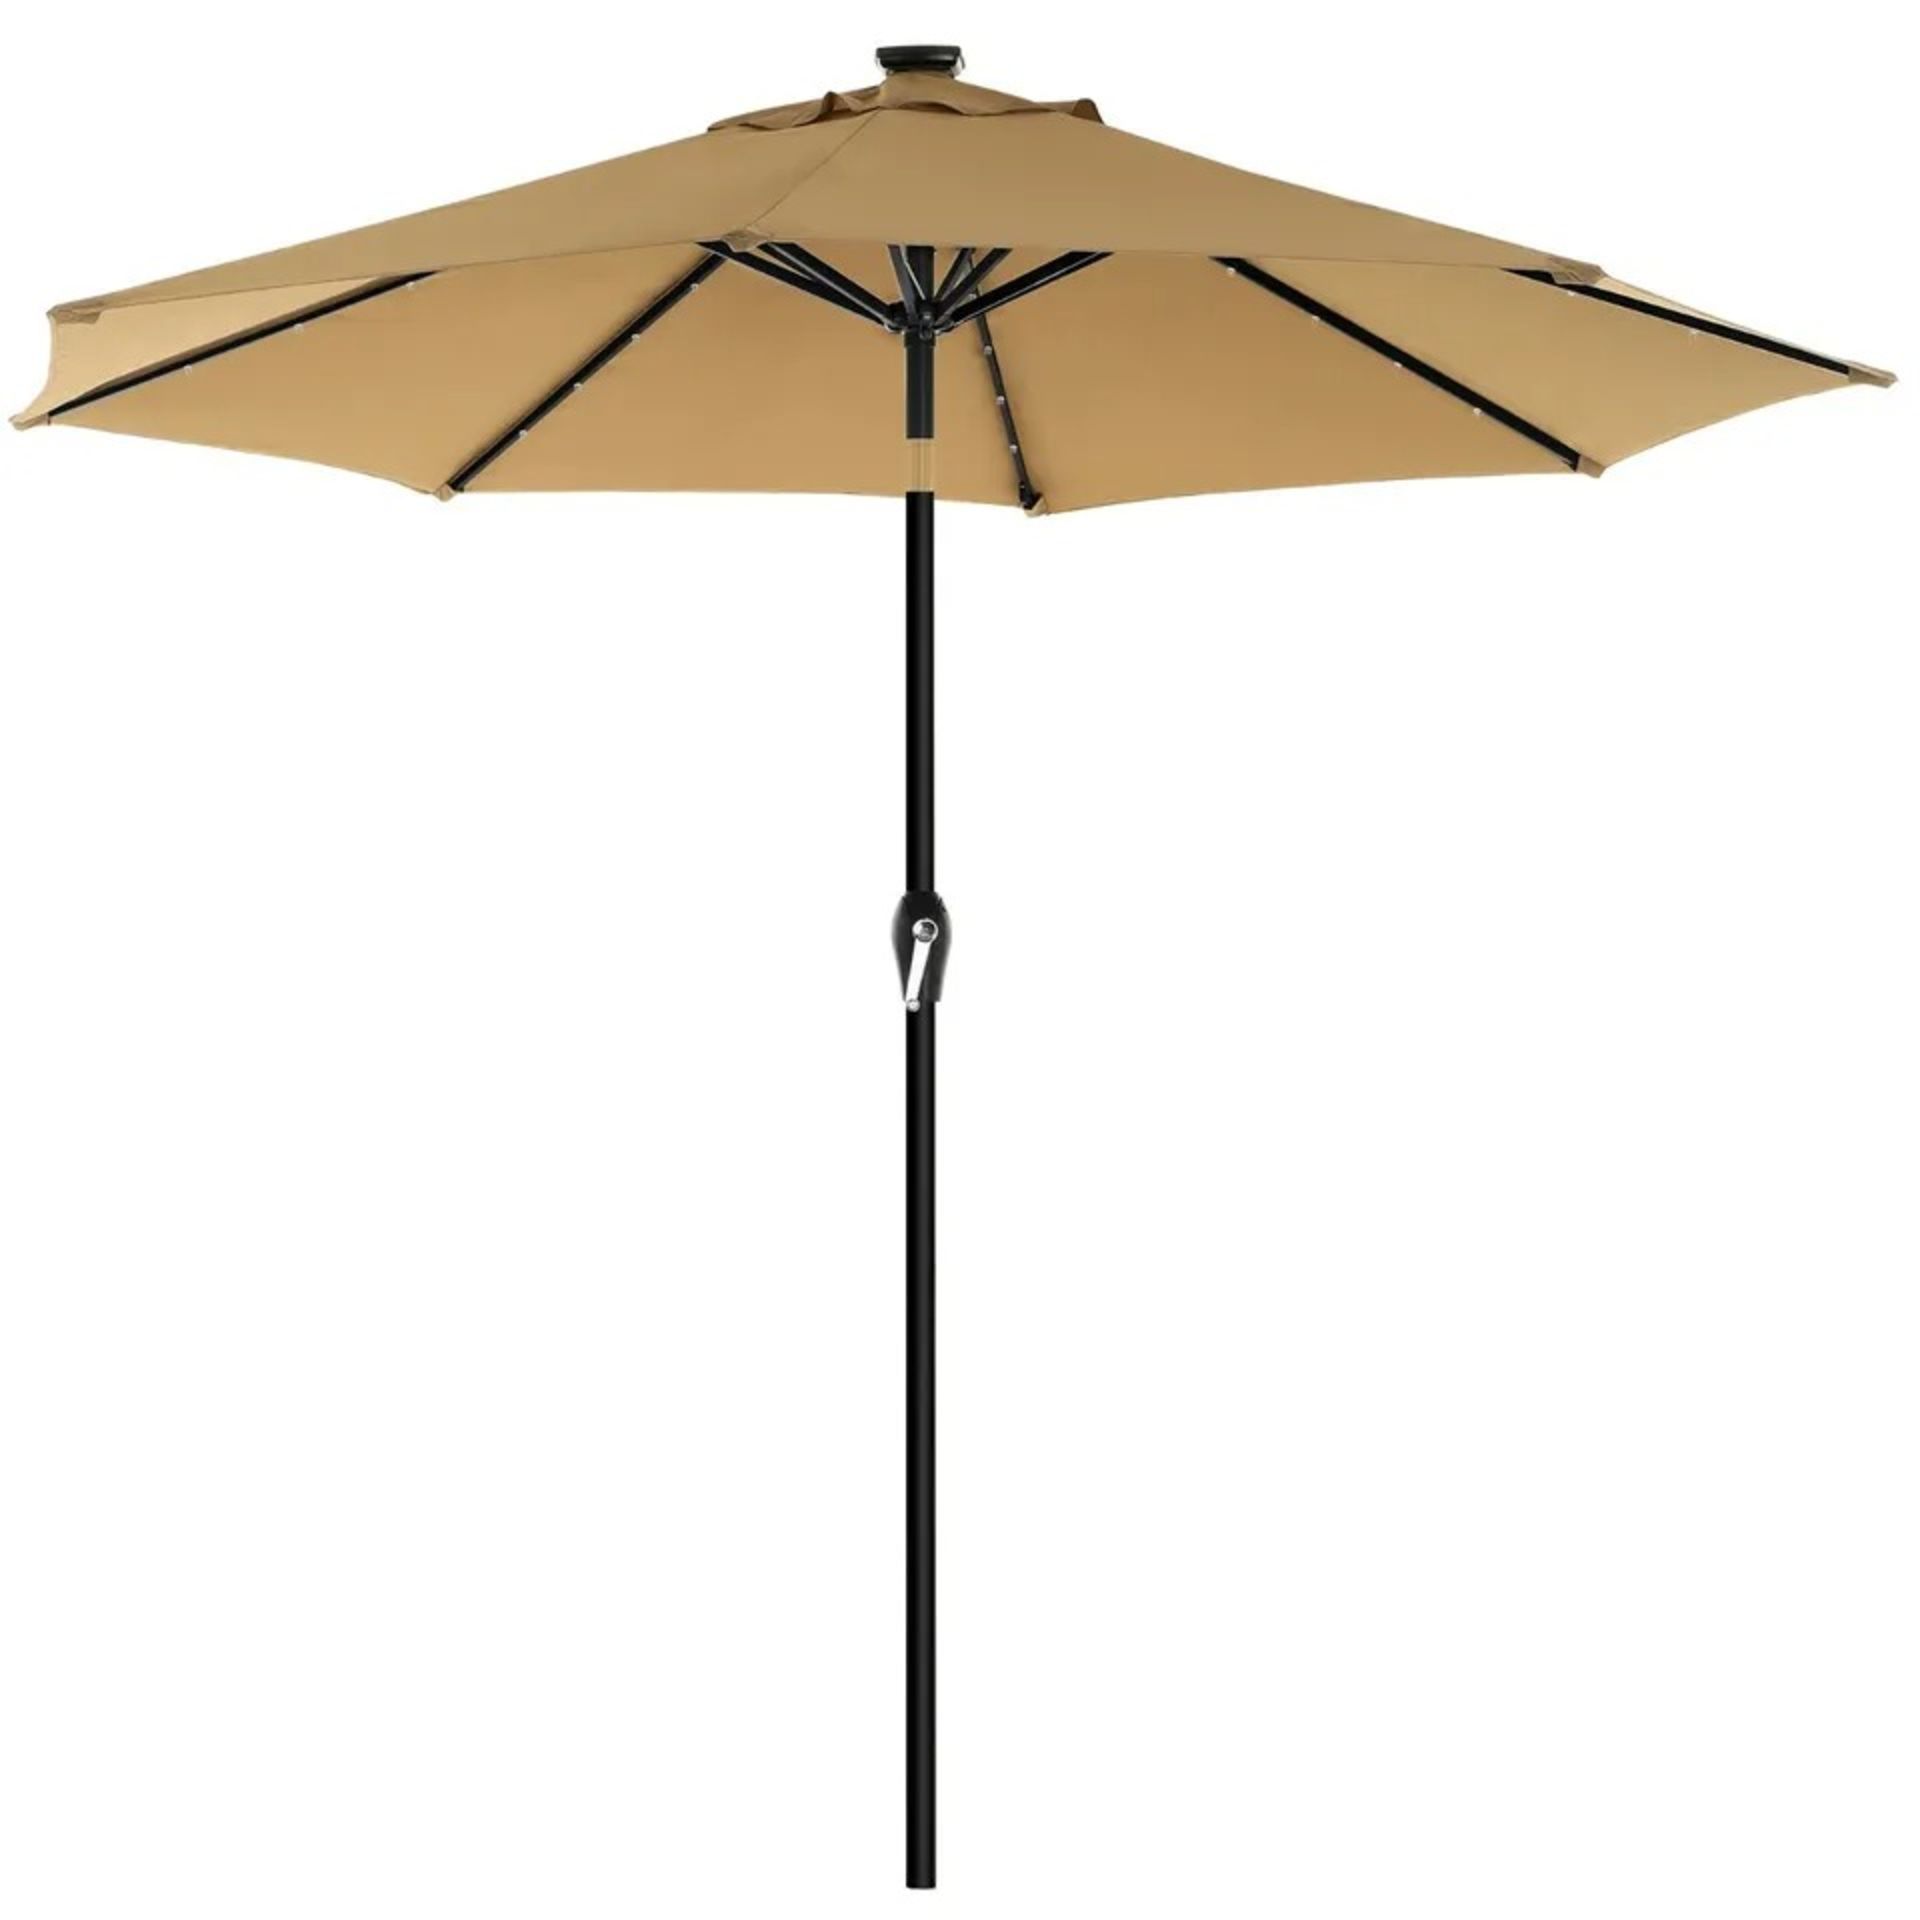 FREE DELIVERY - BRAND NEW SONGMICS 3M GARDEN PARASOL UMBRELLA WITH SOLAR-POWERED LED LIGHTS